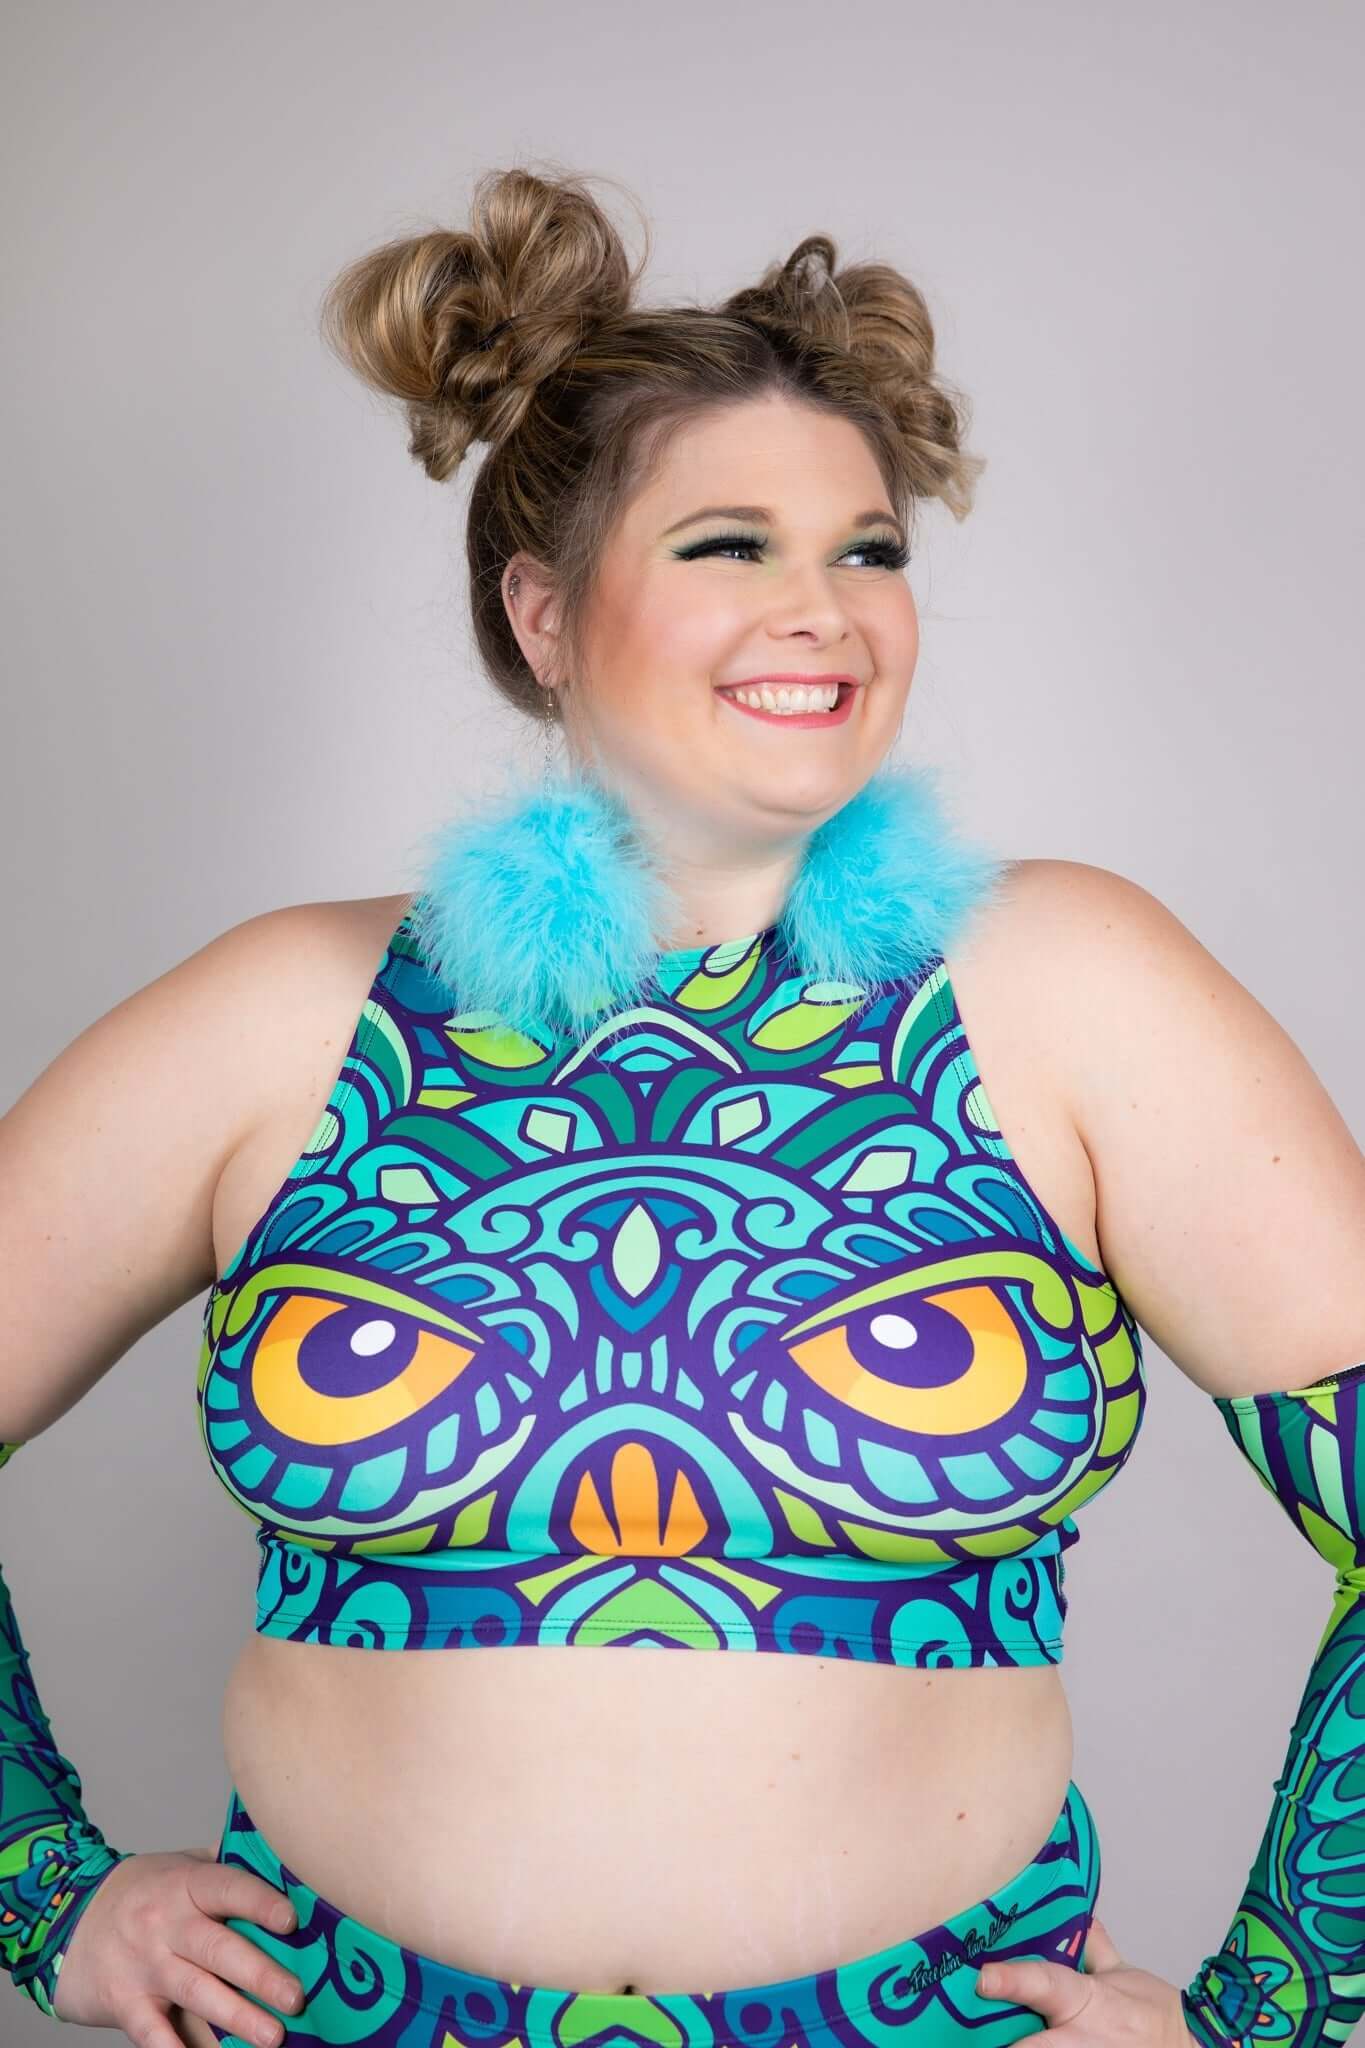 Wise Owl Crop Top - Freedom Rave Wear - Shirts & Tops